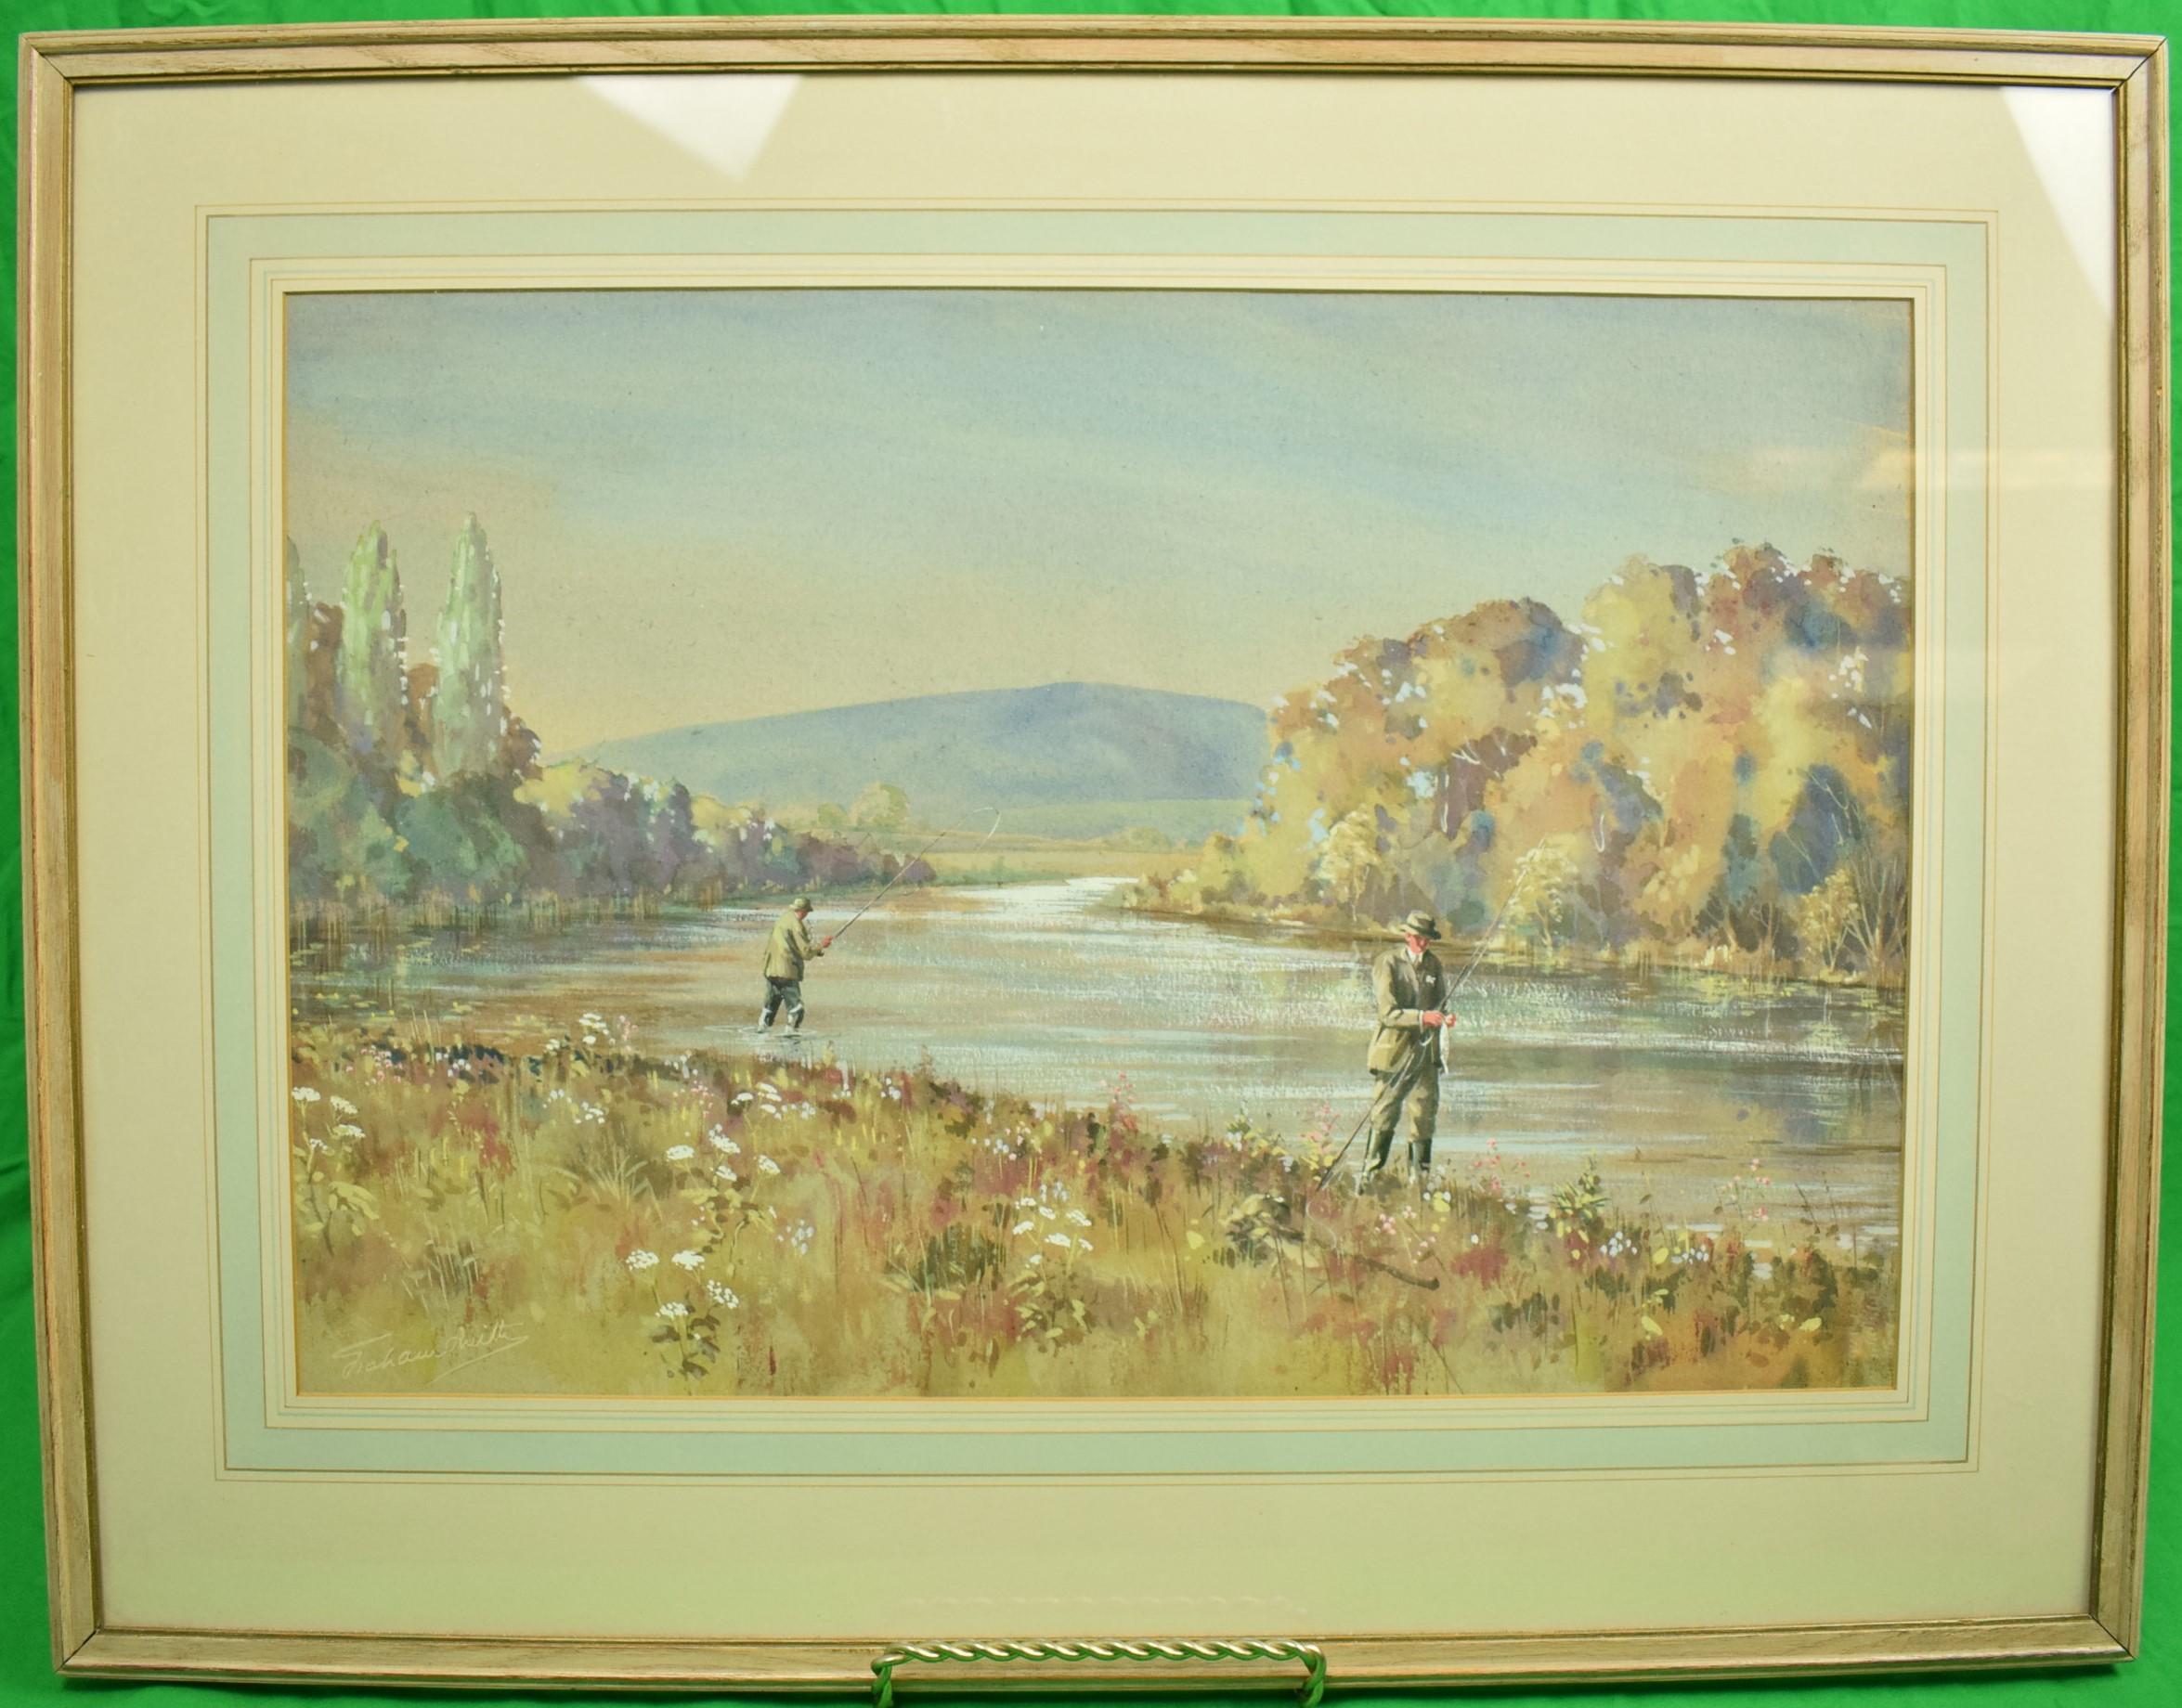 Art Sz: 14 1/2"H x 21 1/2"W

Frame Sz: 22 1/4"H x 28 1/2"W

Signed Lower Left In French Mat